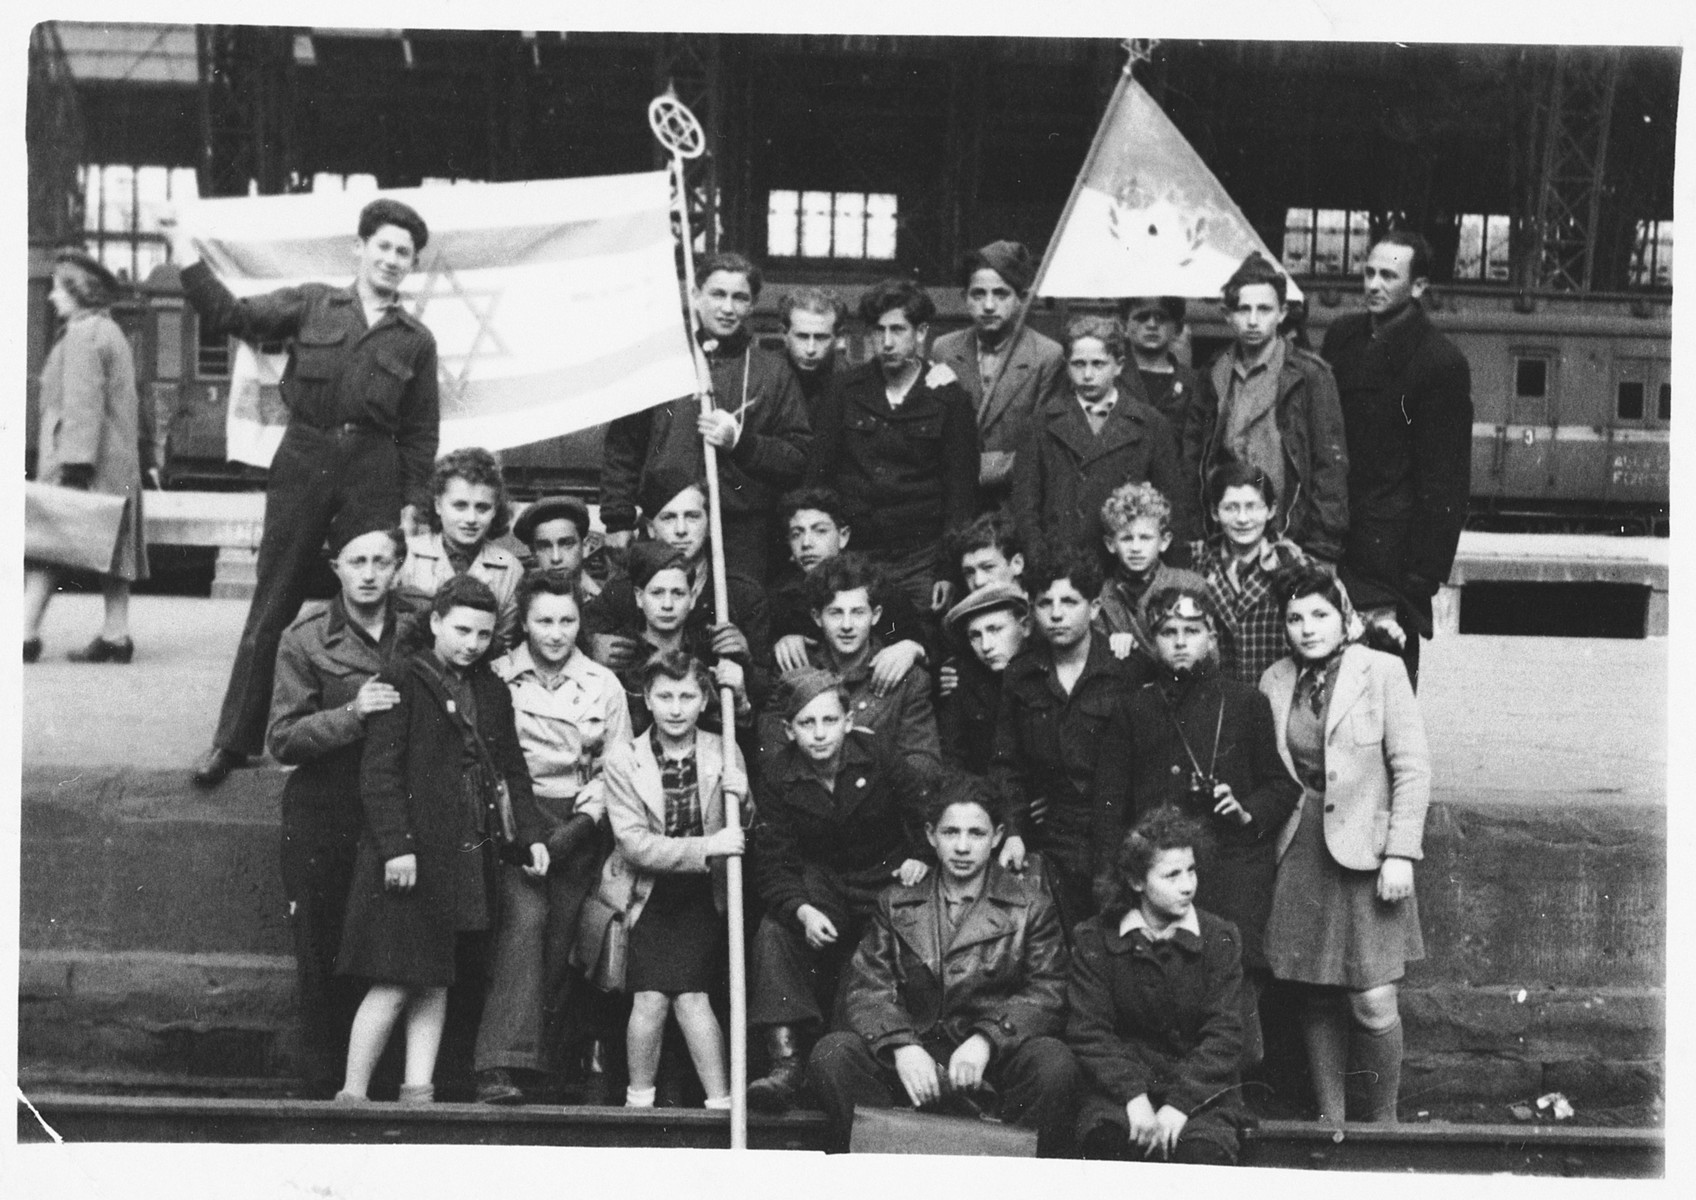 Teenagers from the Zeilsheim children's center pose together with a Zionist flag.

Among those pictured are Eliezer Rosenbach and Shlomo Wacs.